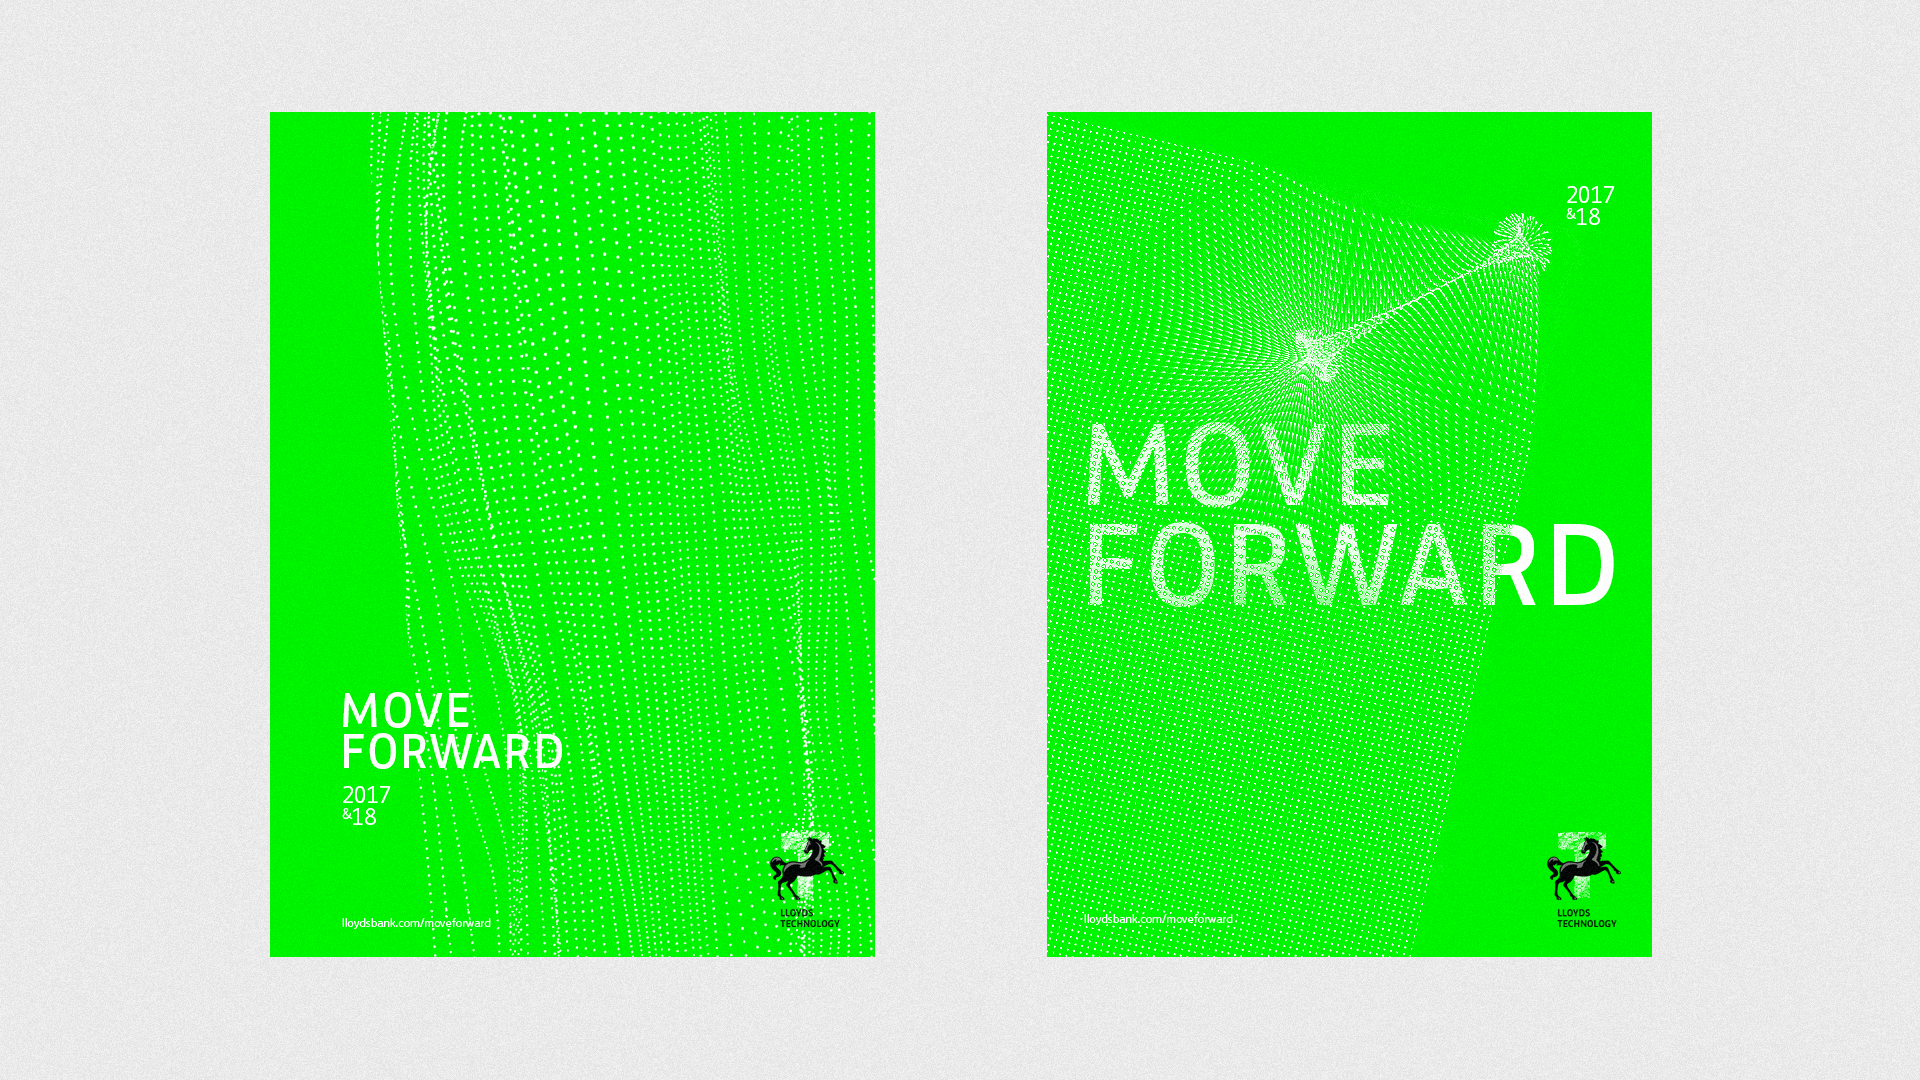 LLOYDS-GroupTech-Posters_MoveForward-02a